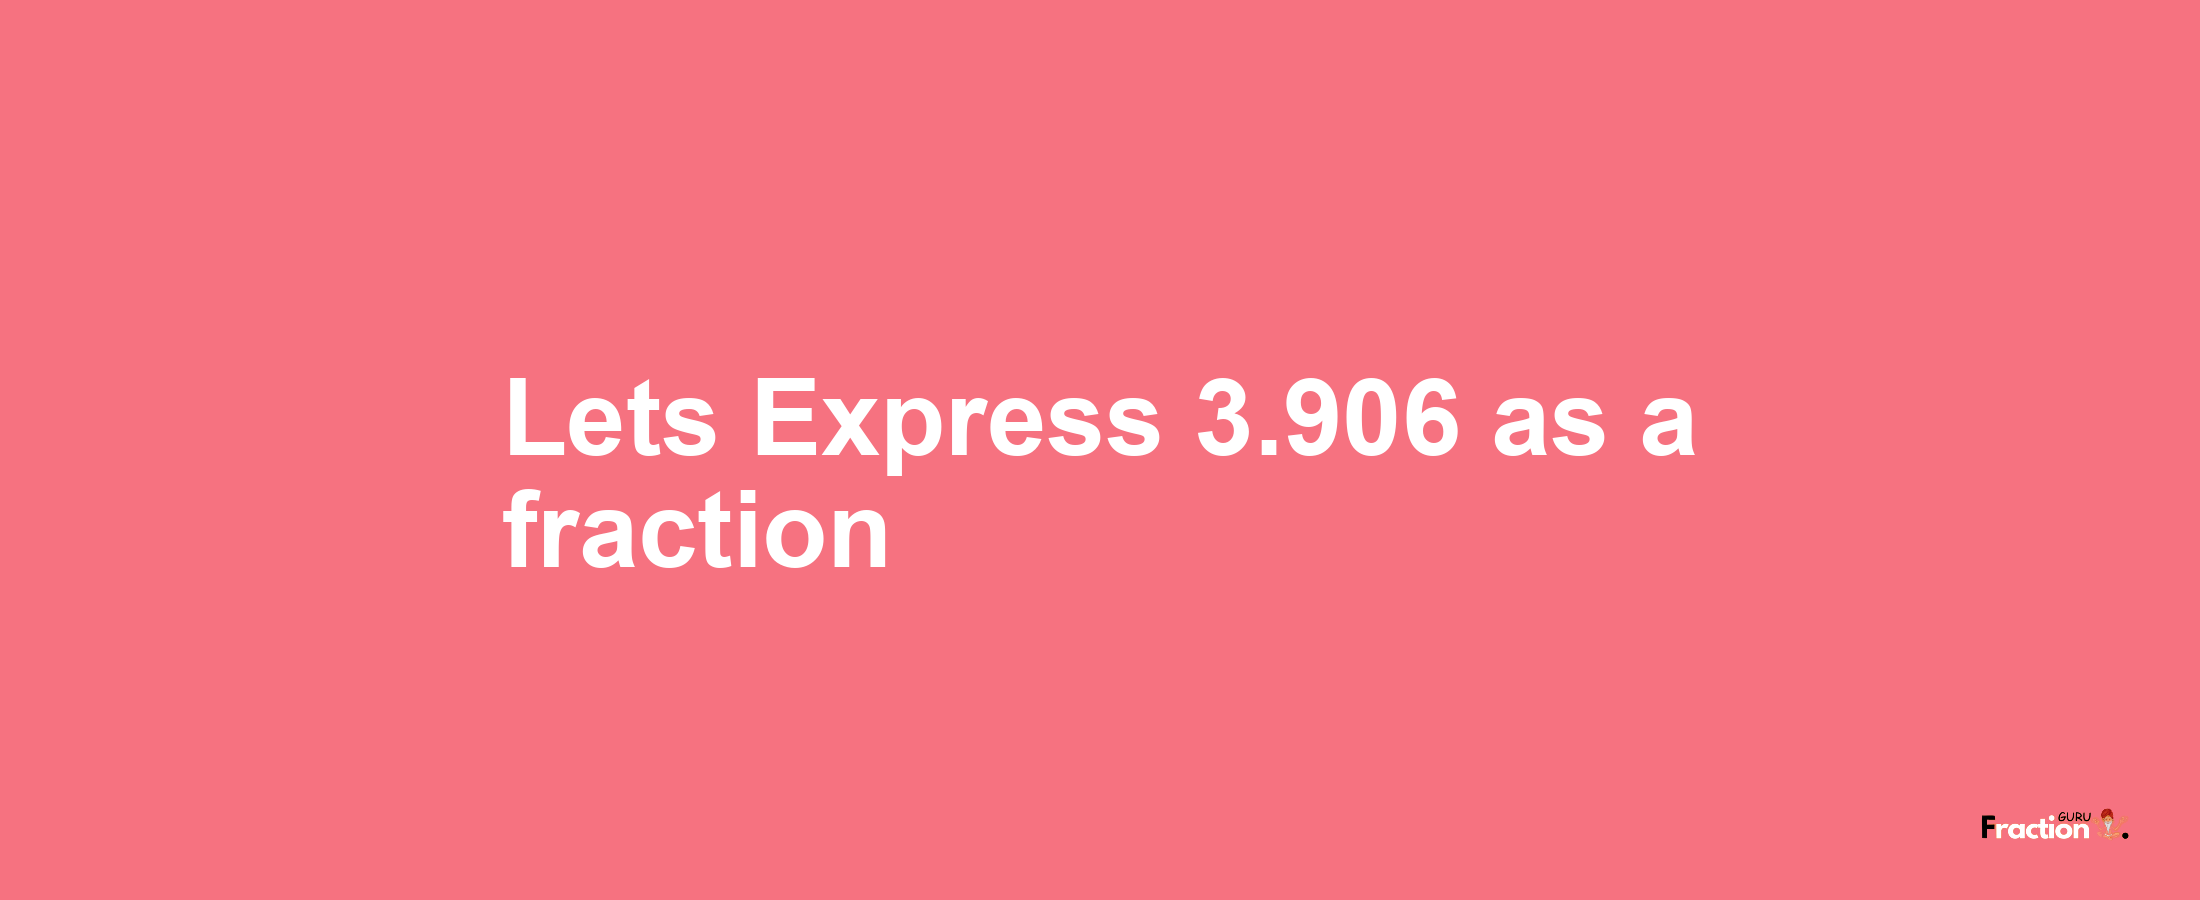 Lets Express 3.906 as afraction